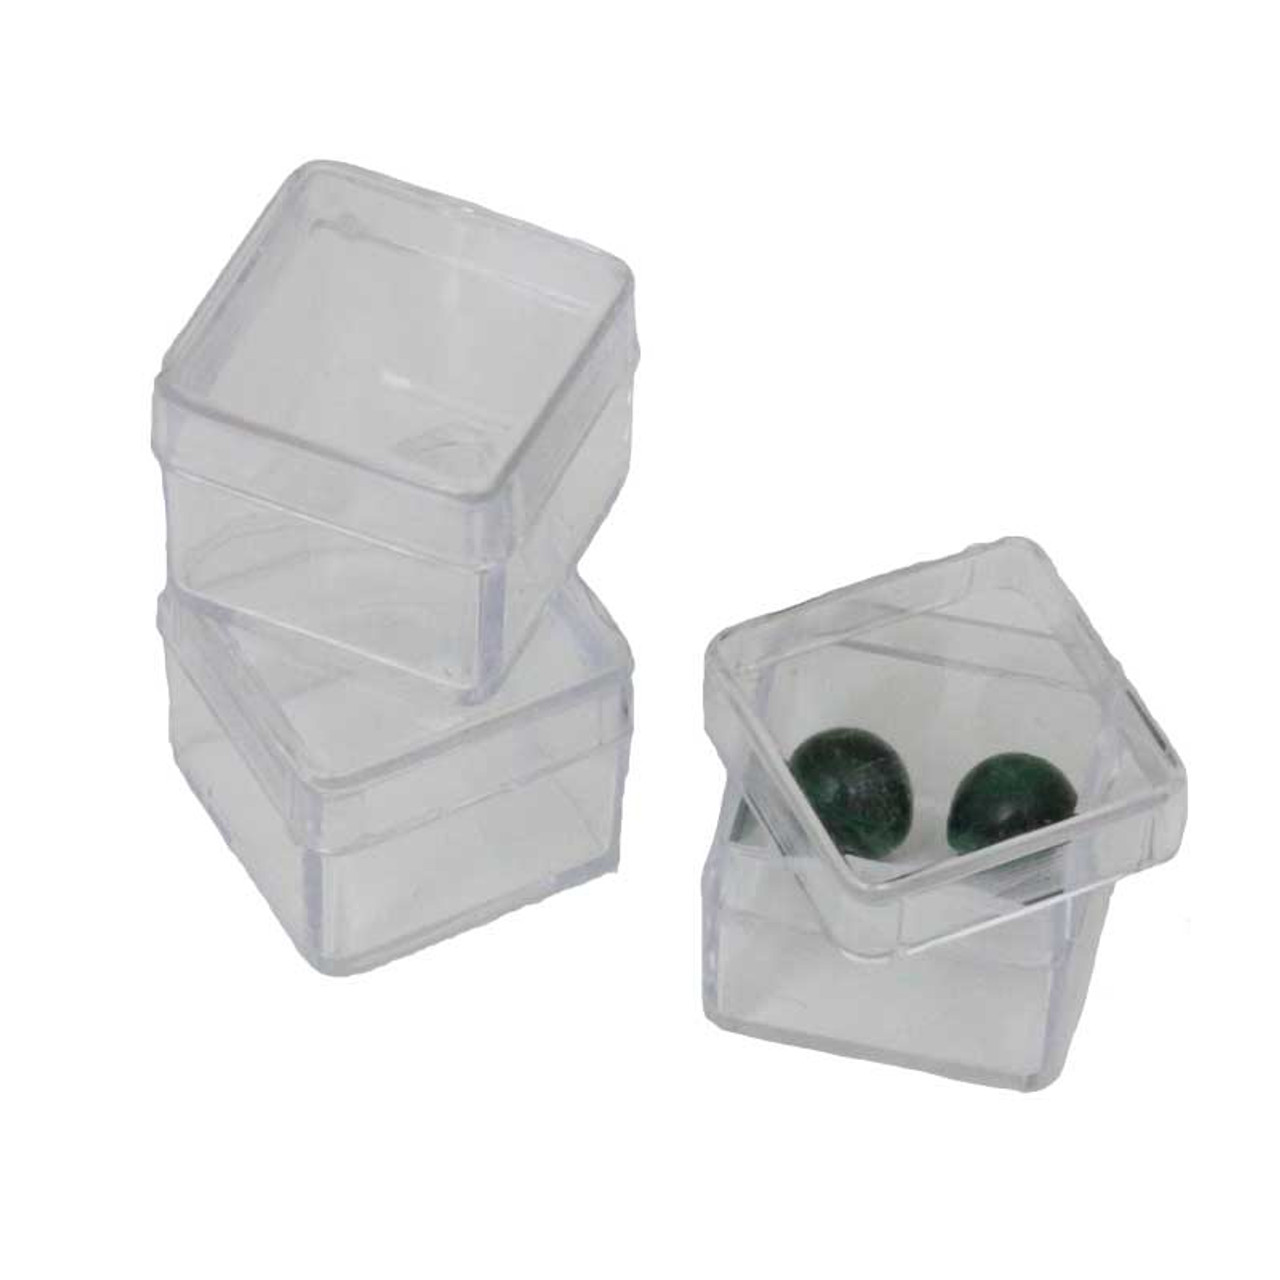 Clear Plastic Boxes Small Size 15 Boxes in Larger Outer Case